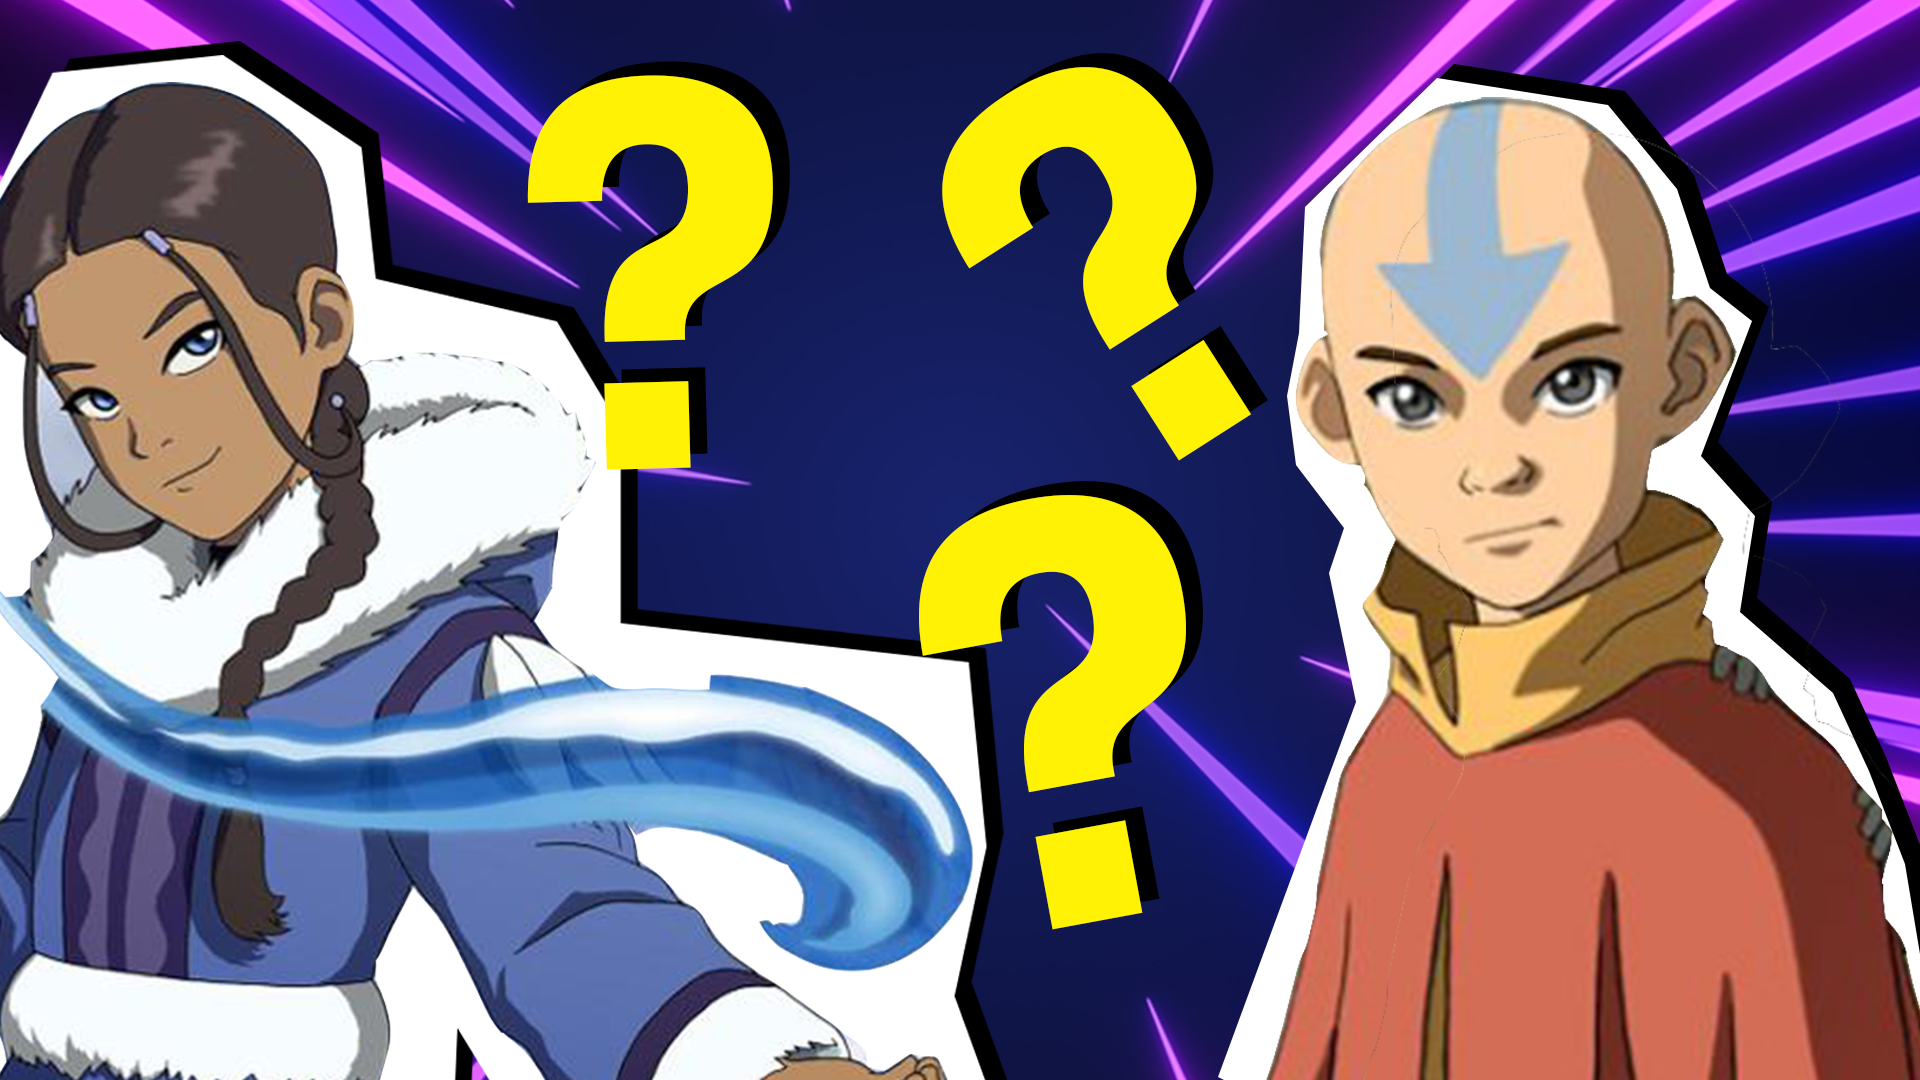 How Old Are Avatar The Last Airbender Characters Katara Zuko and Sokka   Avatar The Last Airbender Character Ages